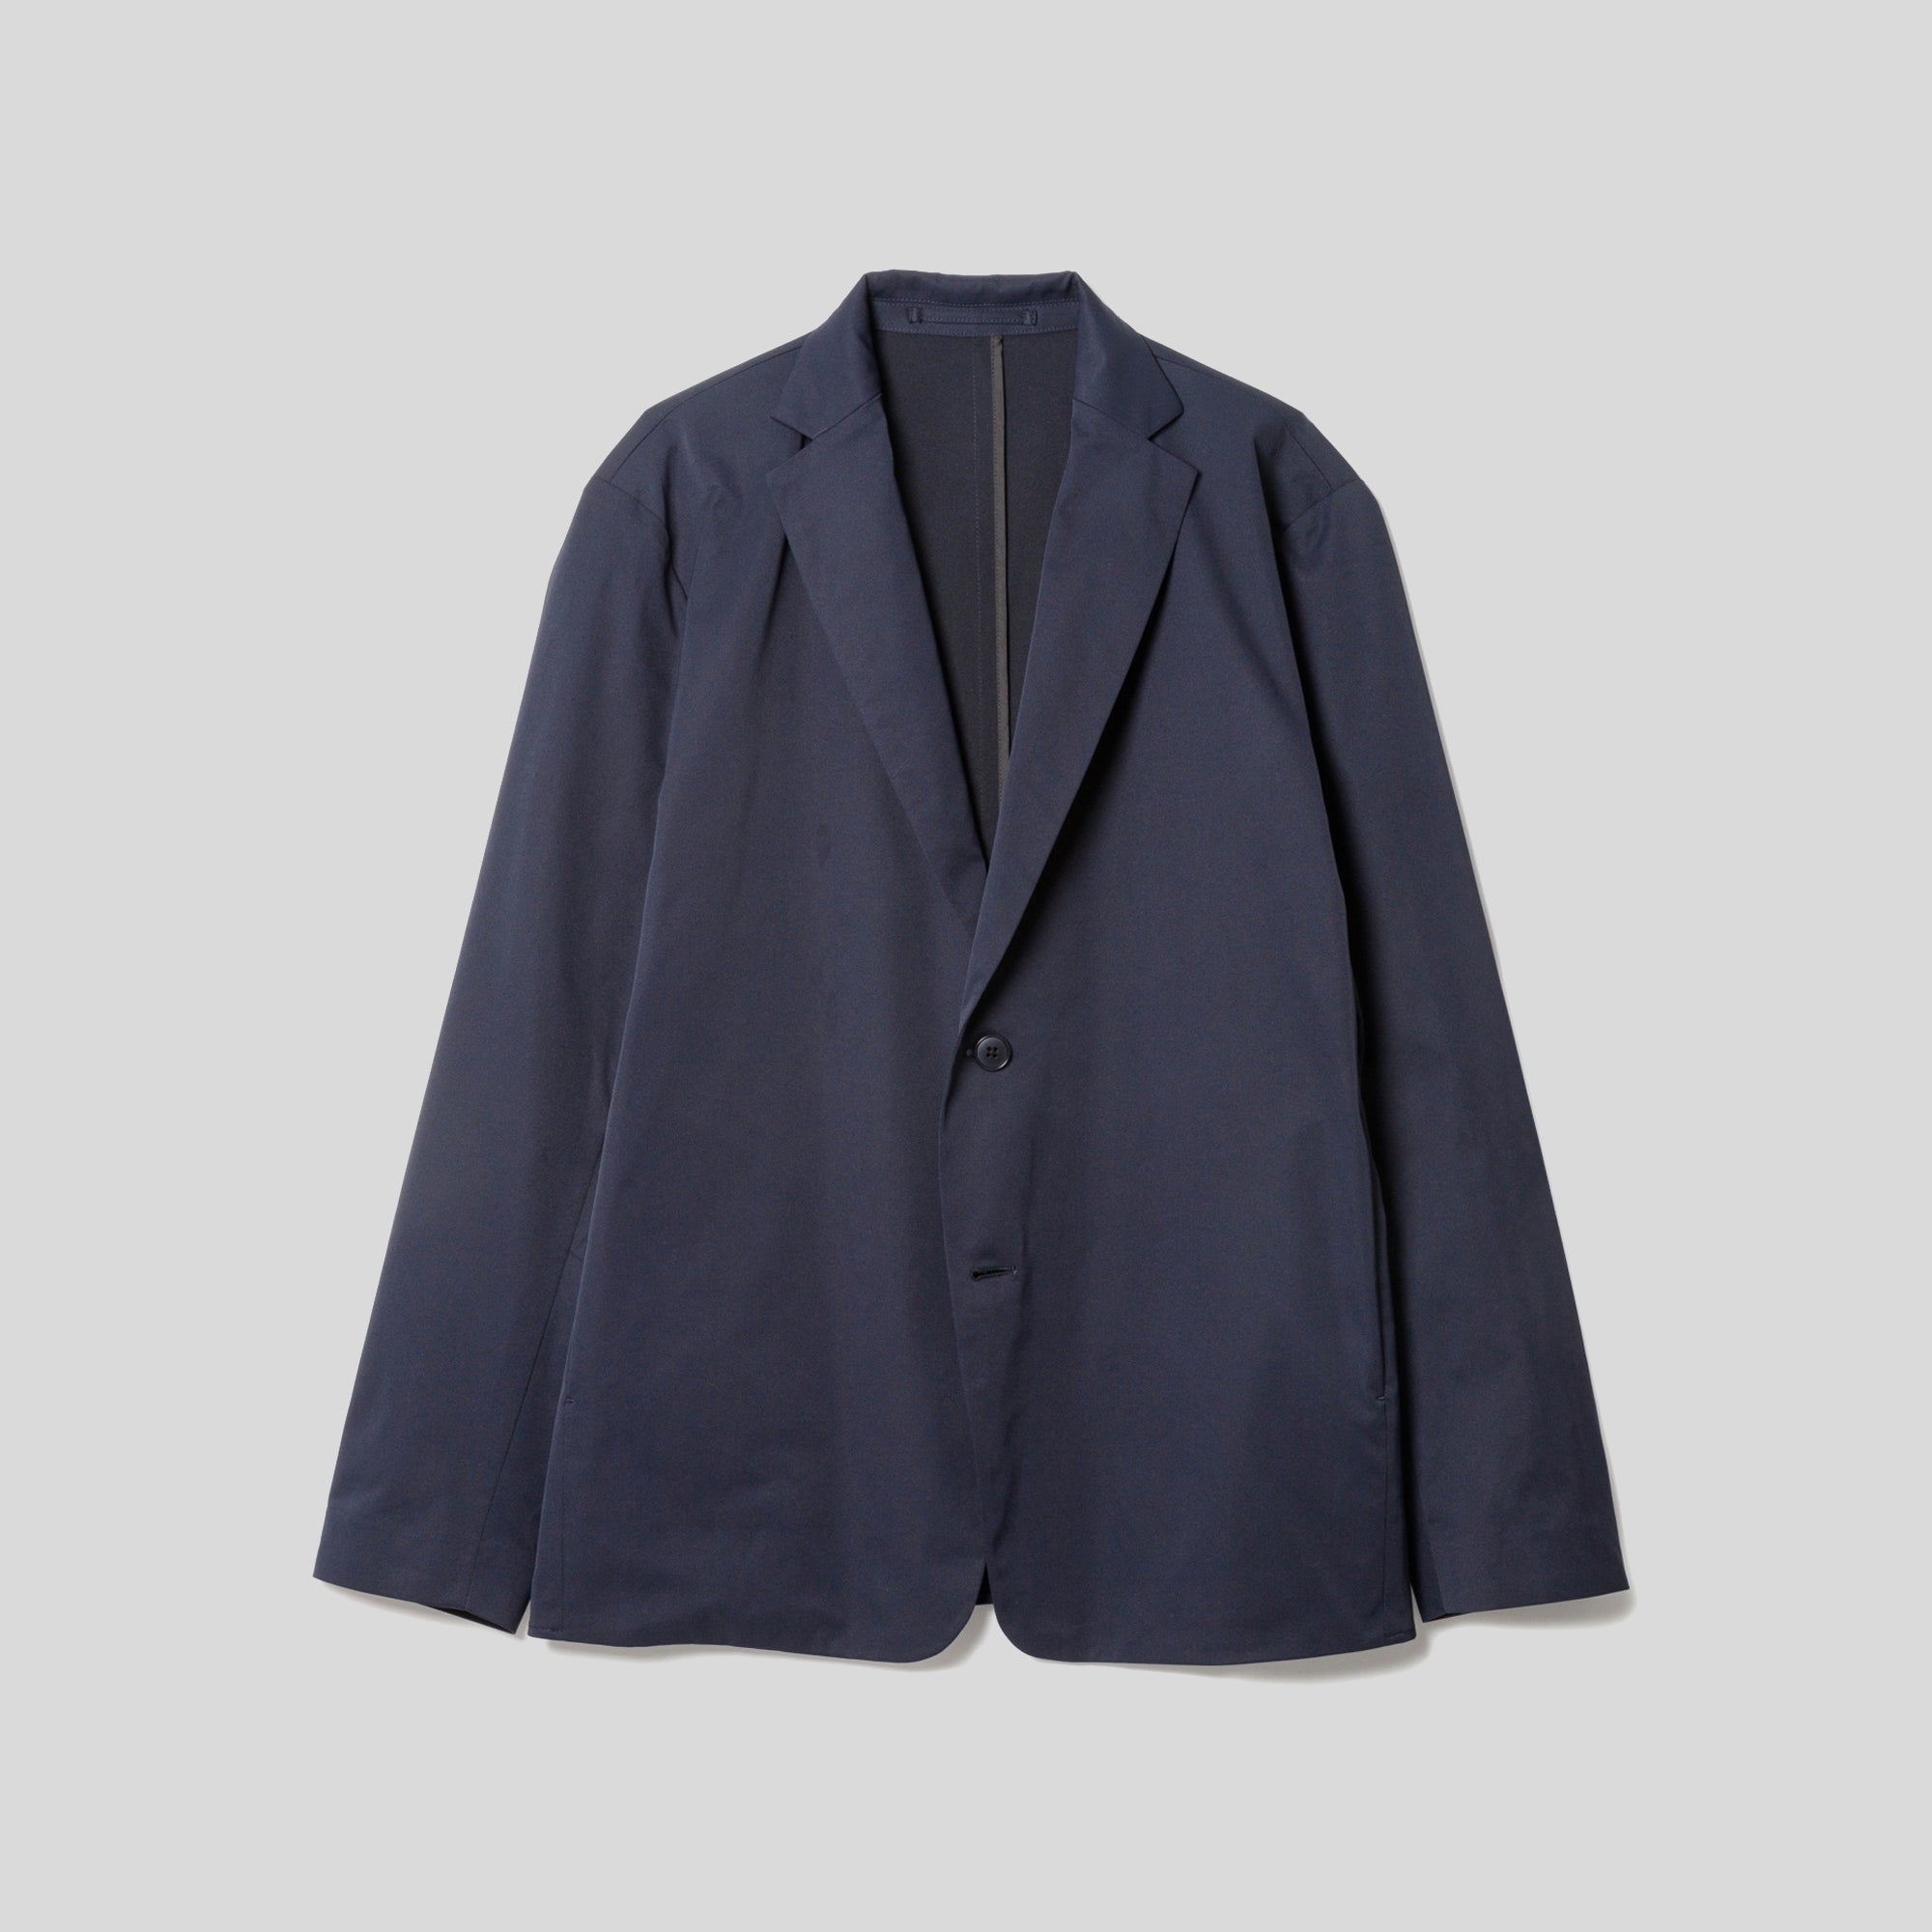 Sandinista / New Normal Solotex® Suit Jacket[DS-SJ02] 【島根県出雲